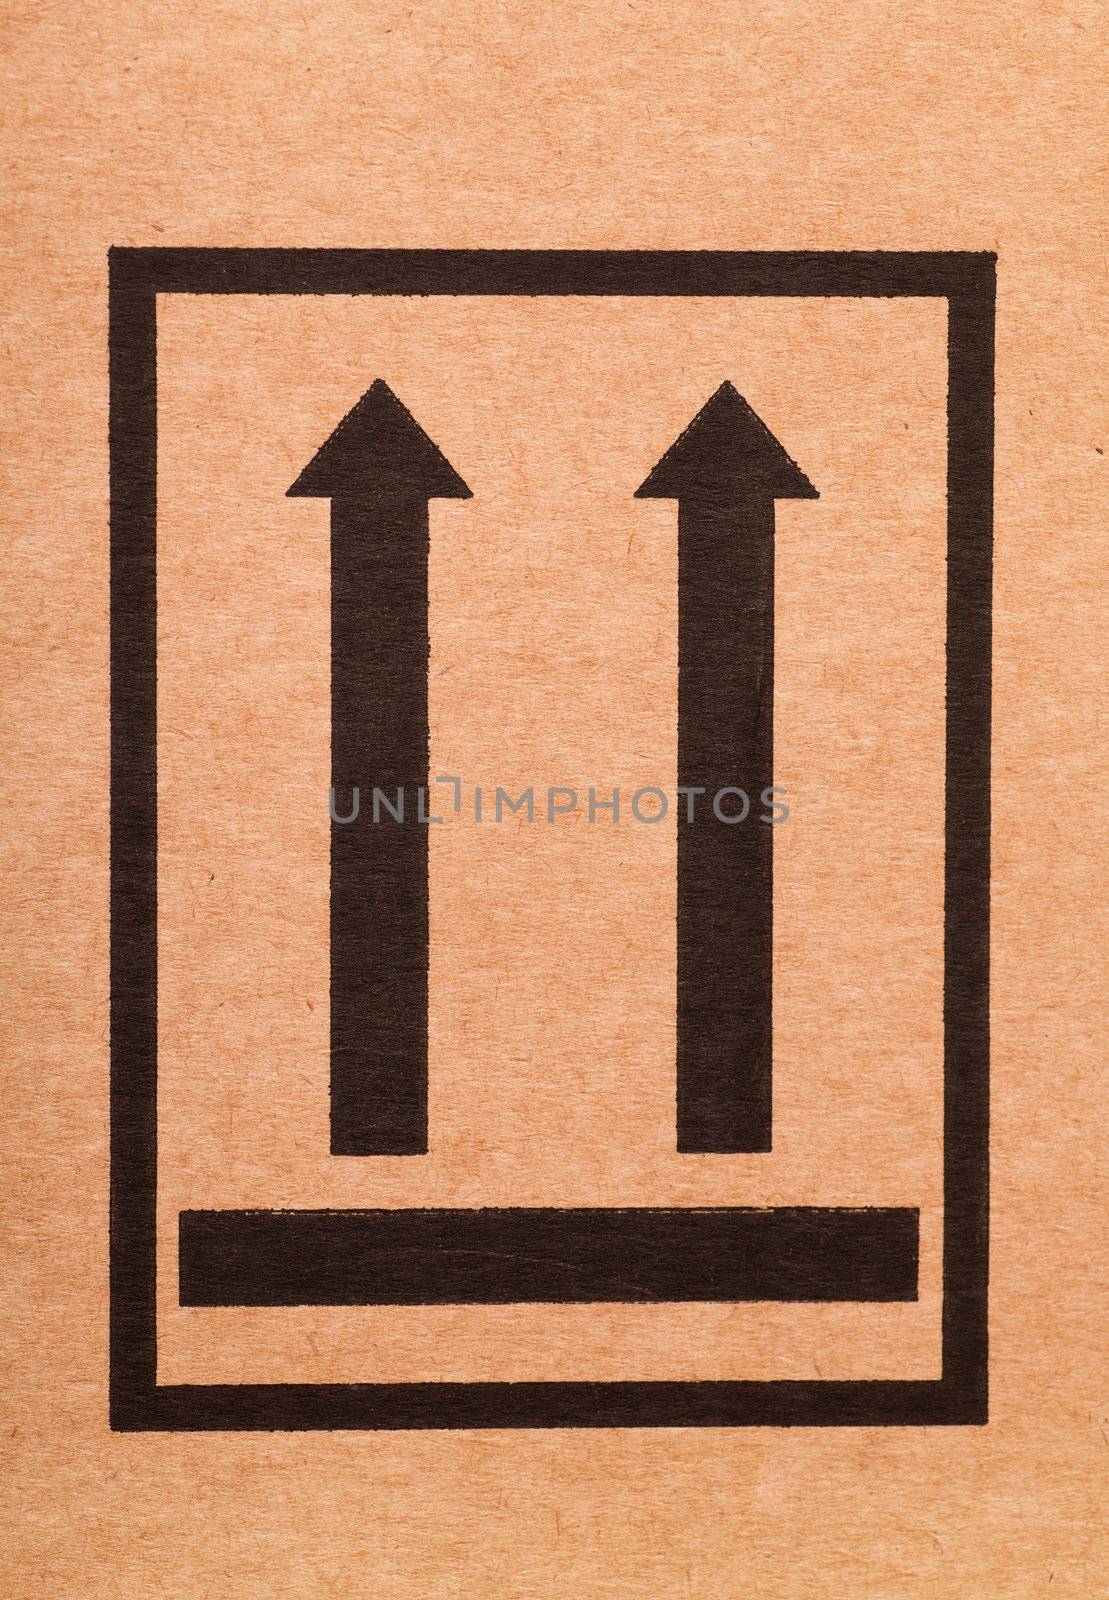 "This side up" sign on a cardboard box